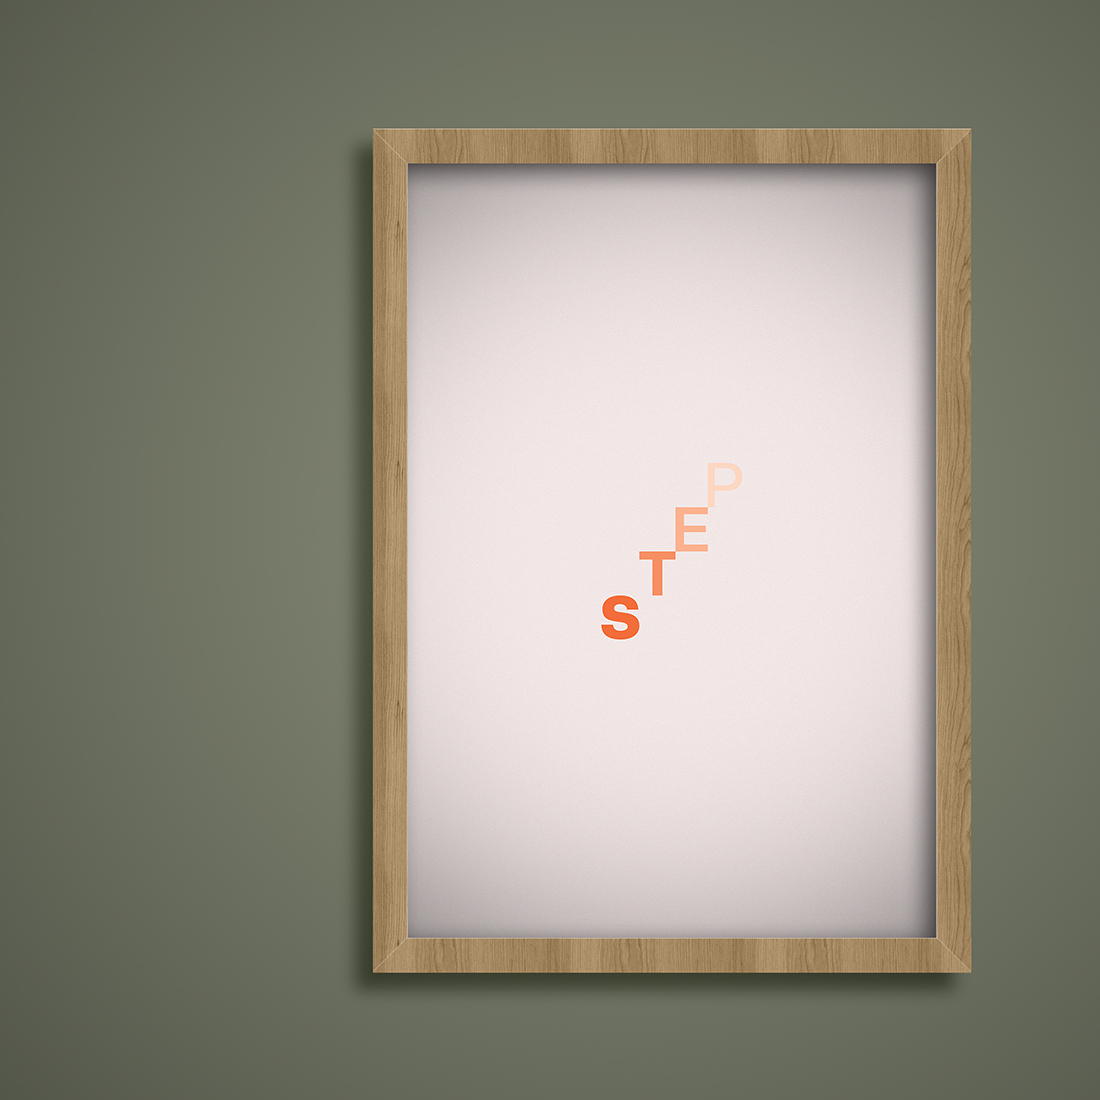 Minimalistic Positive Poster - photo frame preview.